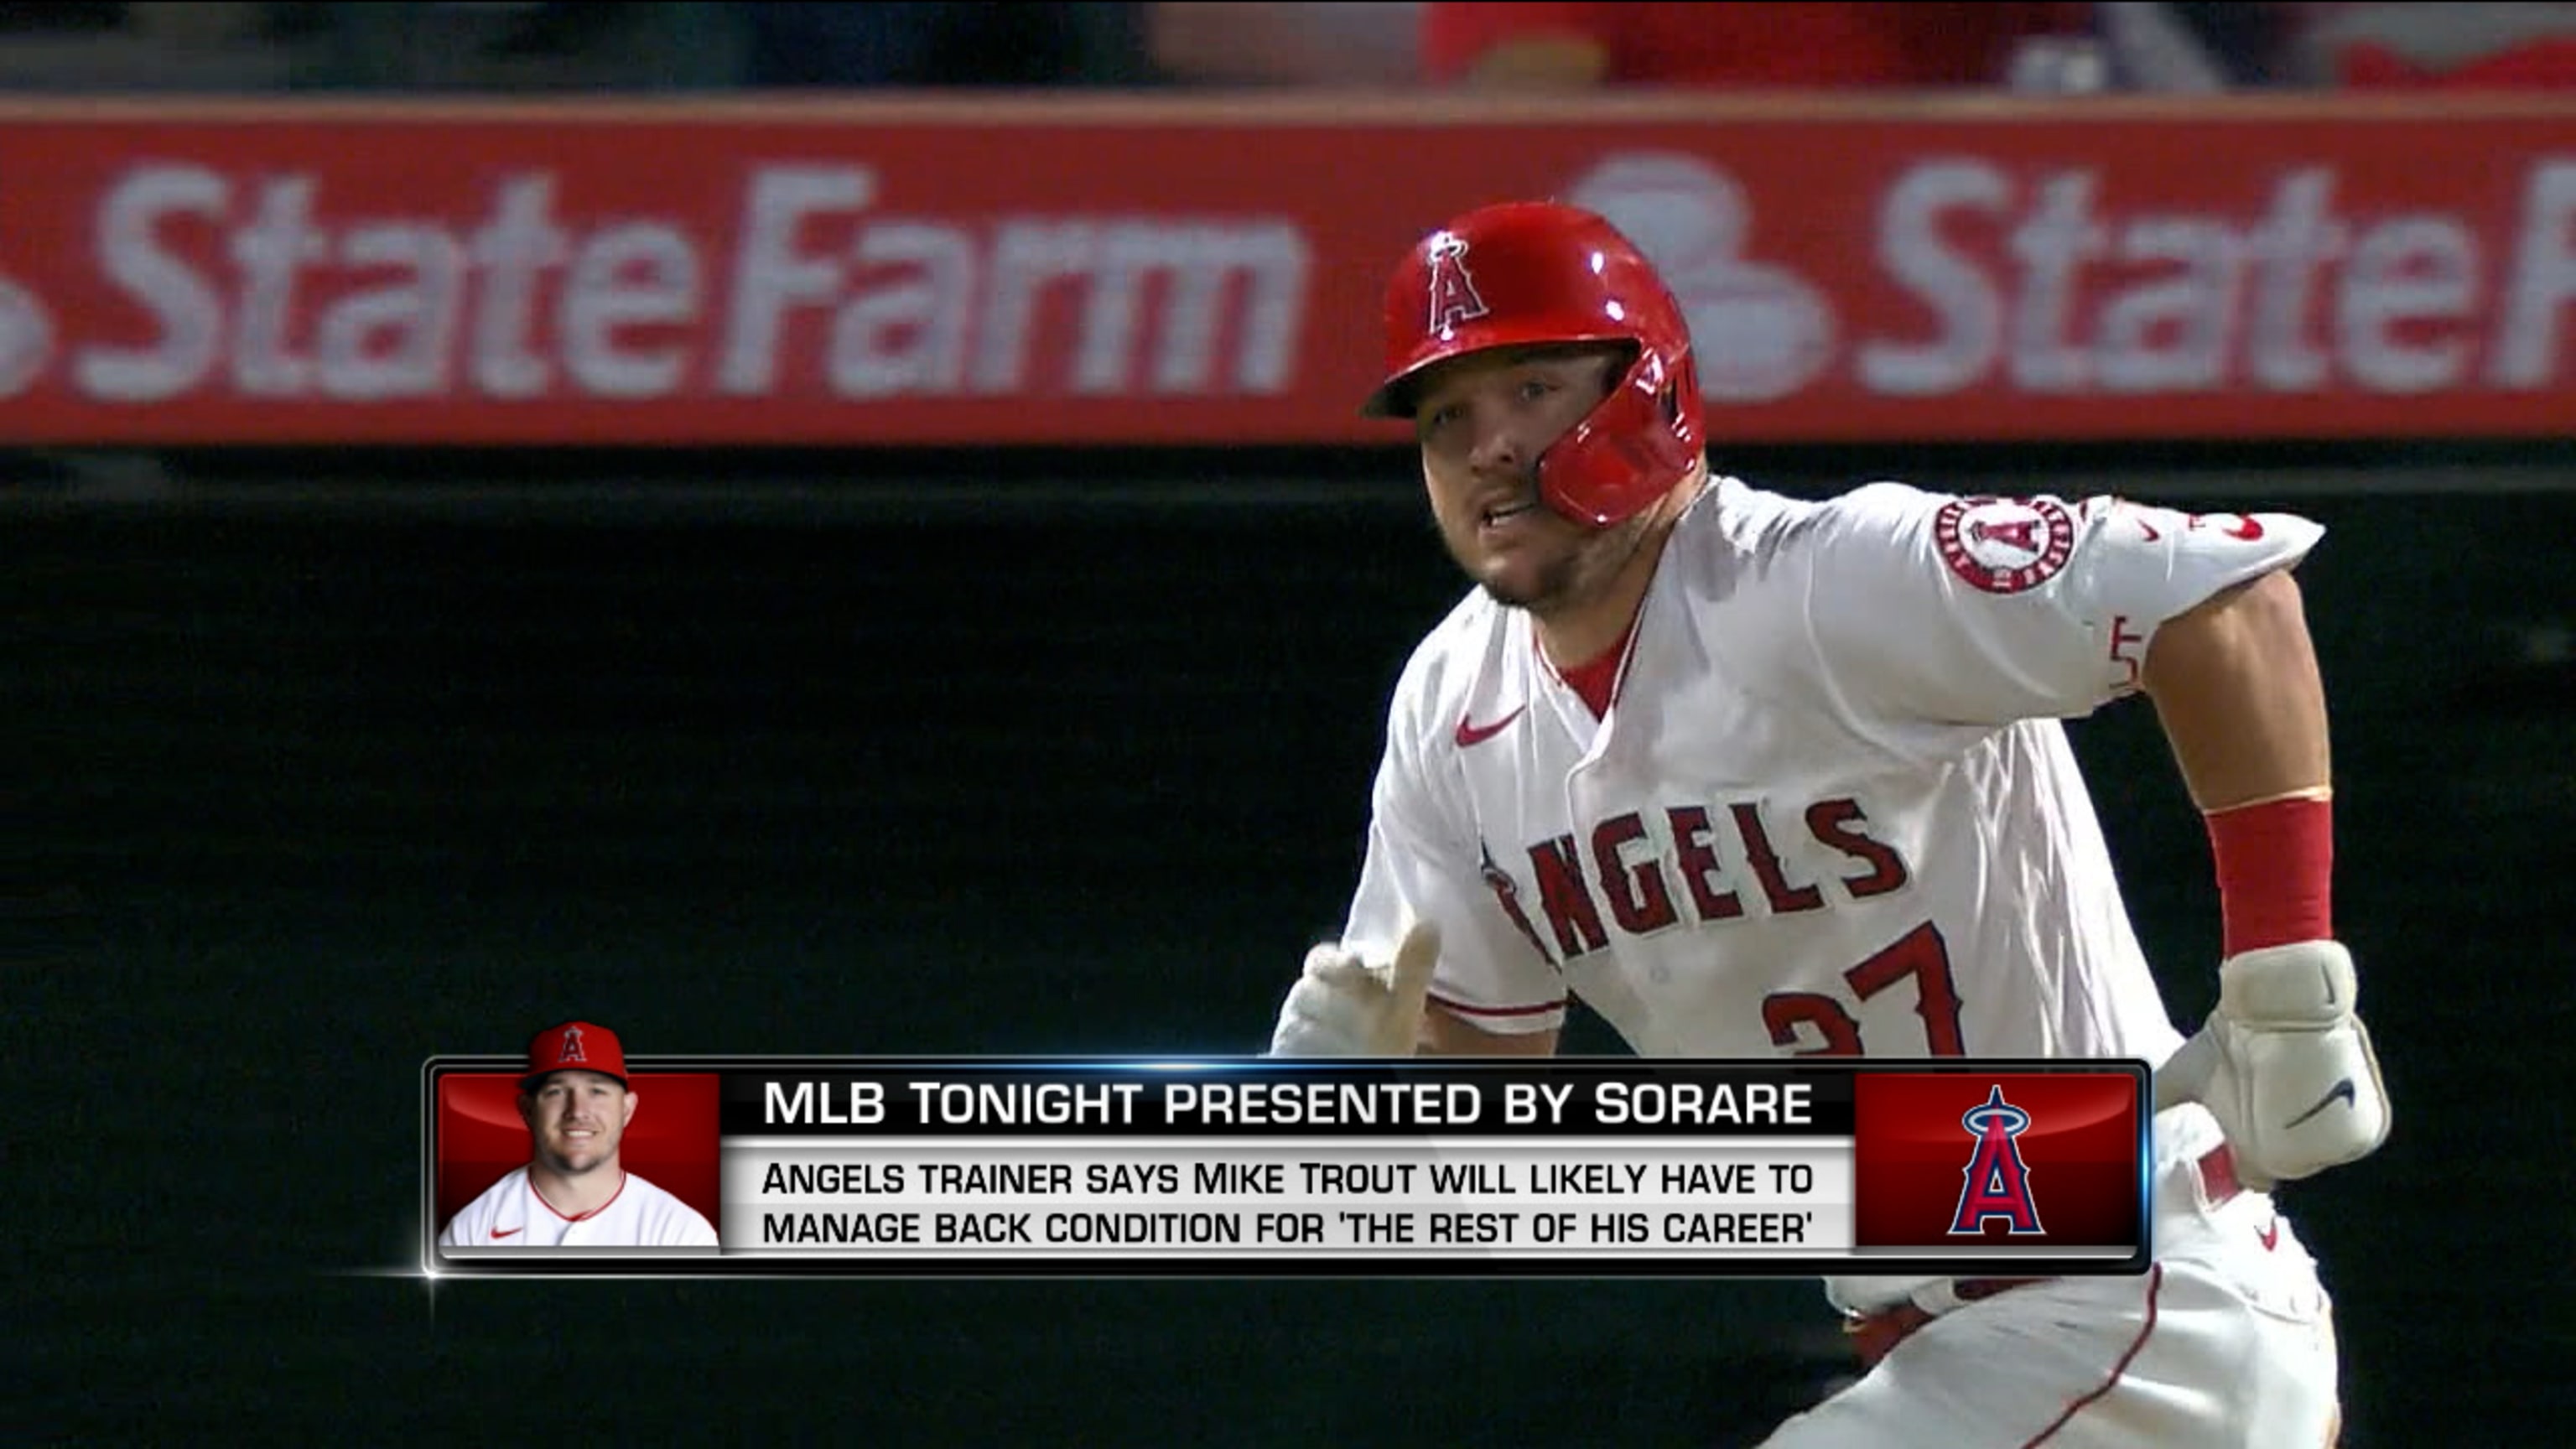 Mike Trout News, Biography, MLB Records, Stats & Facts